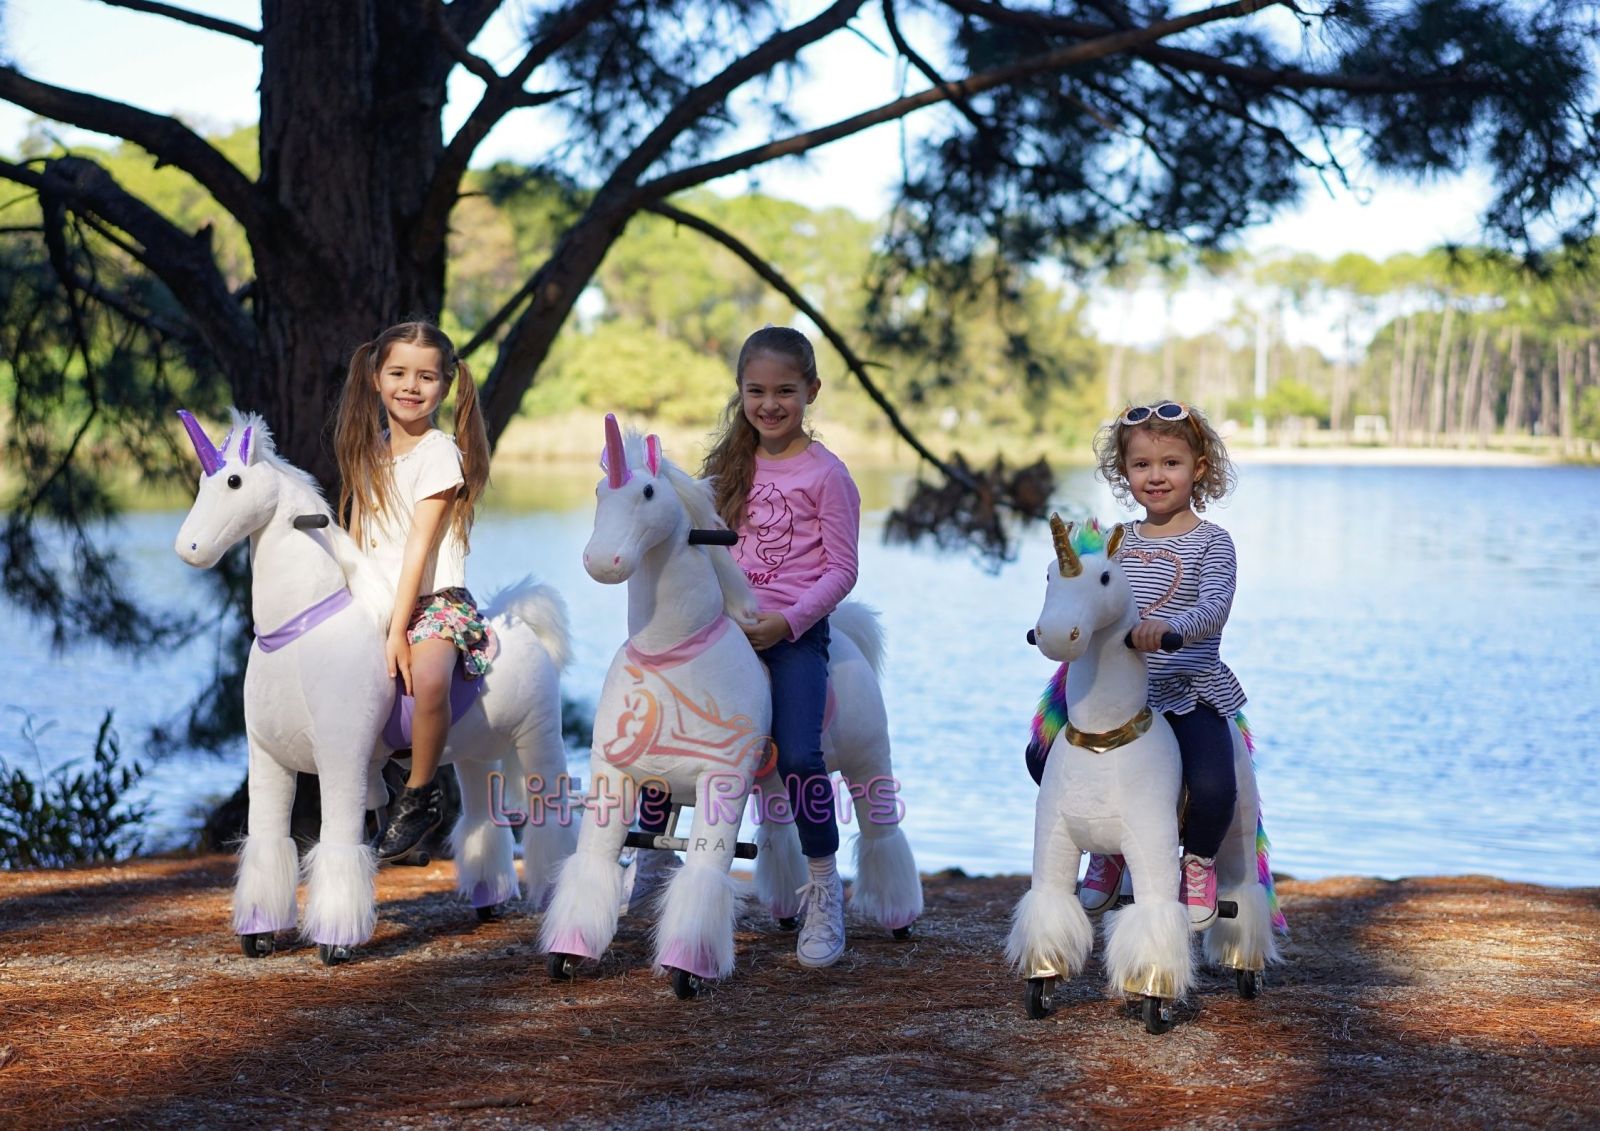 Ride on toys - Kids ride on unicorn Medium and small size